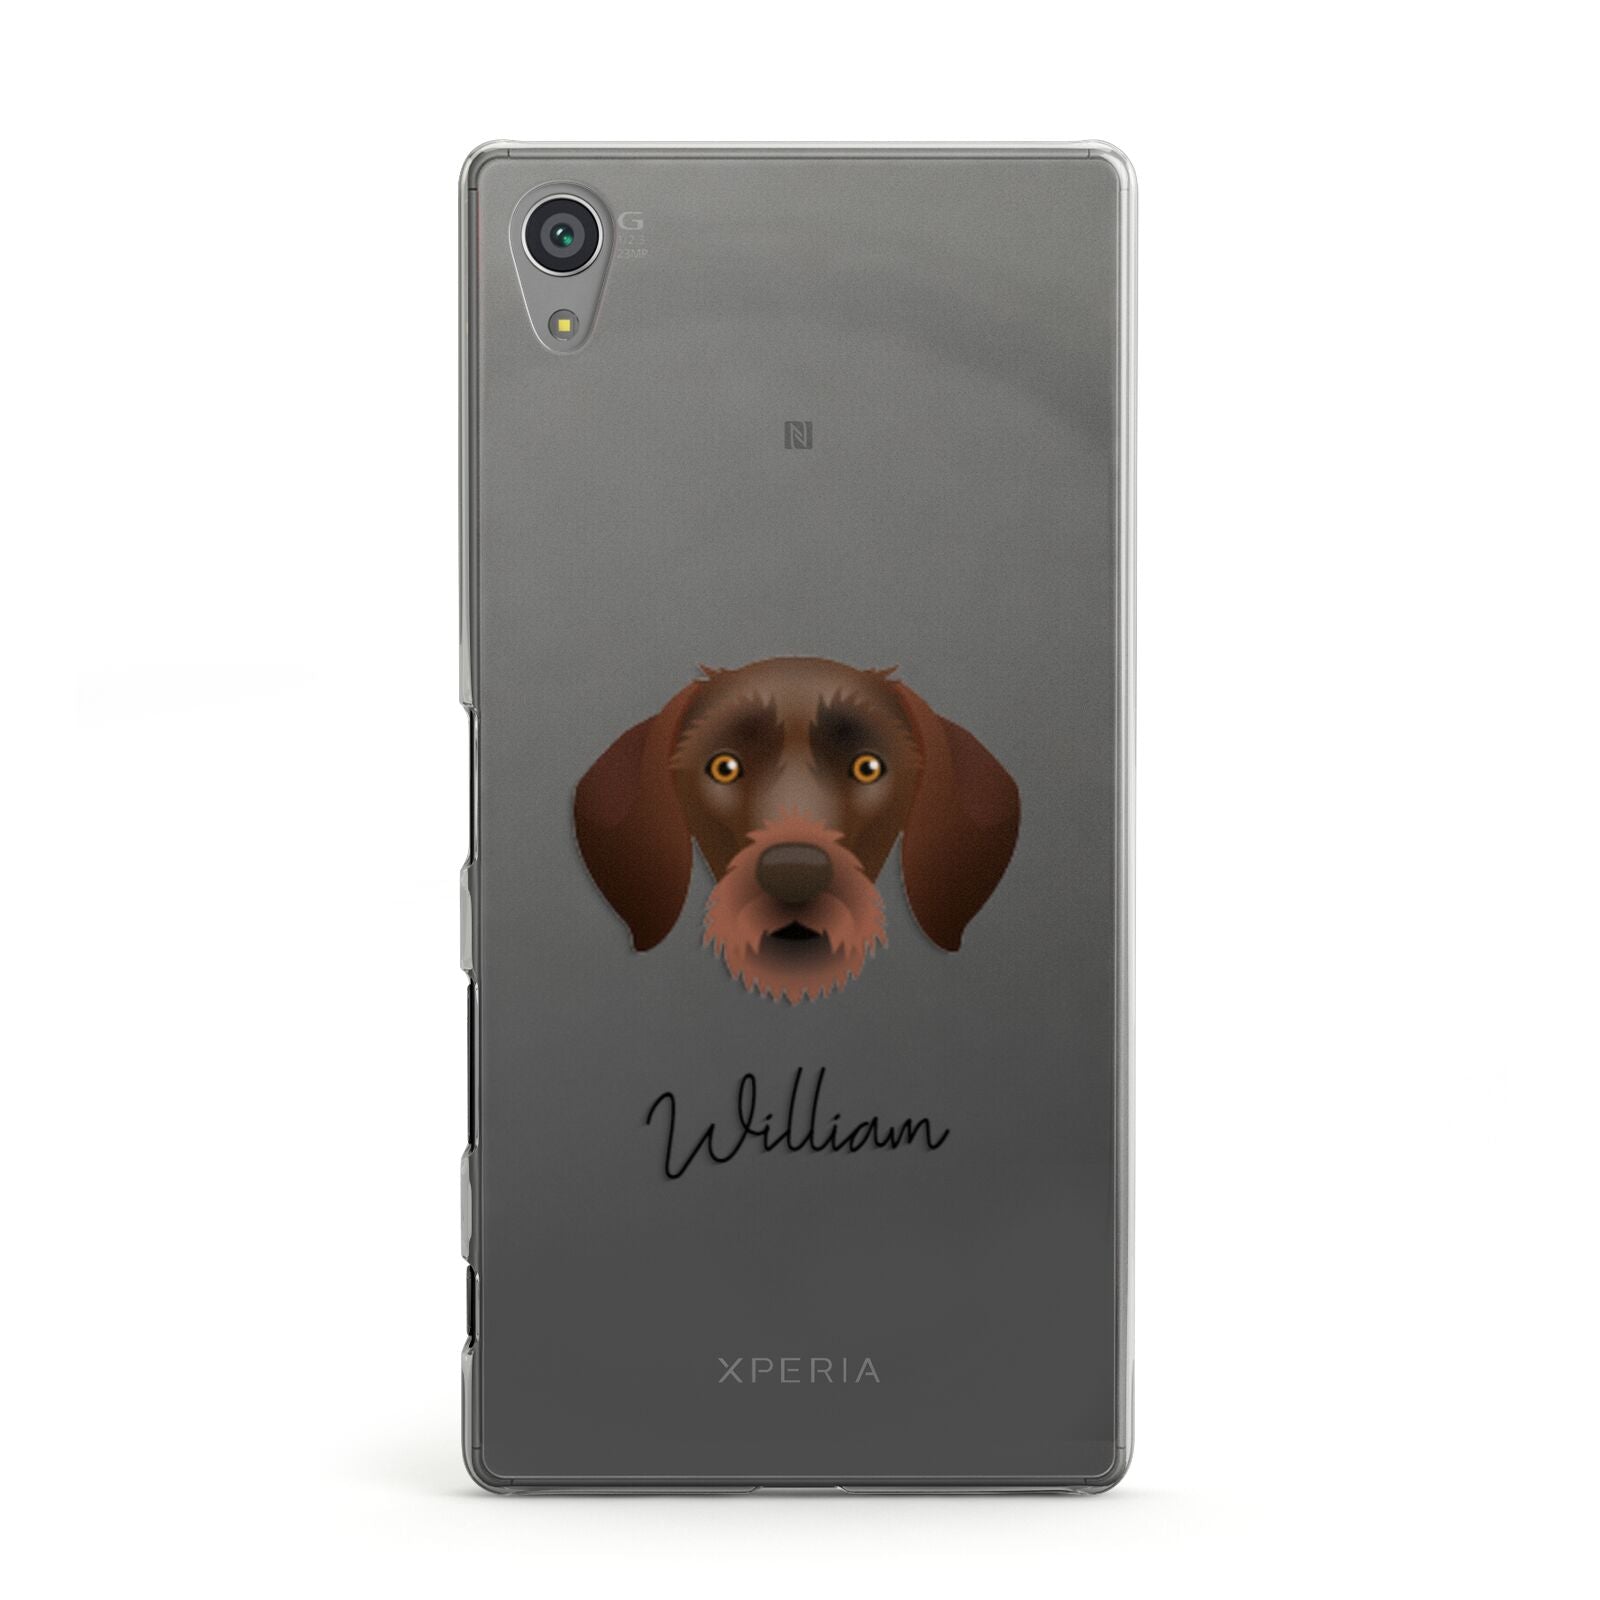 German Wirehaired Pointer Personalised Sony Xperia Case